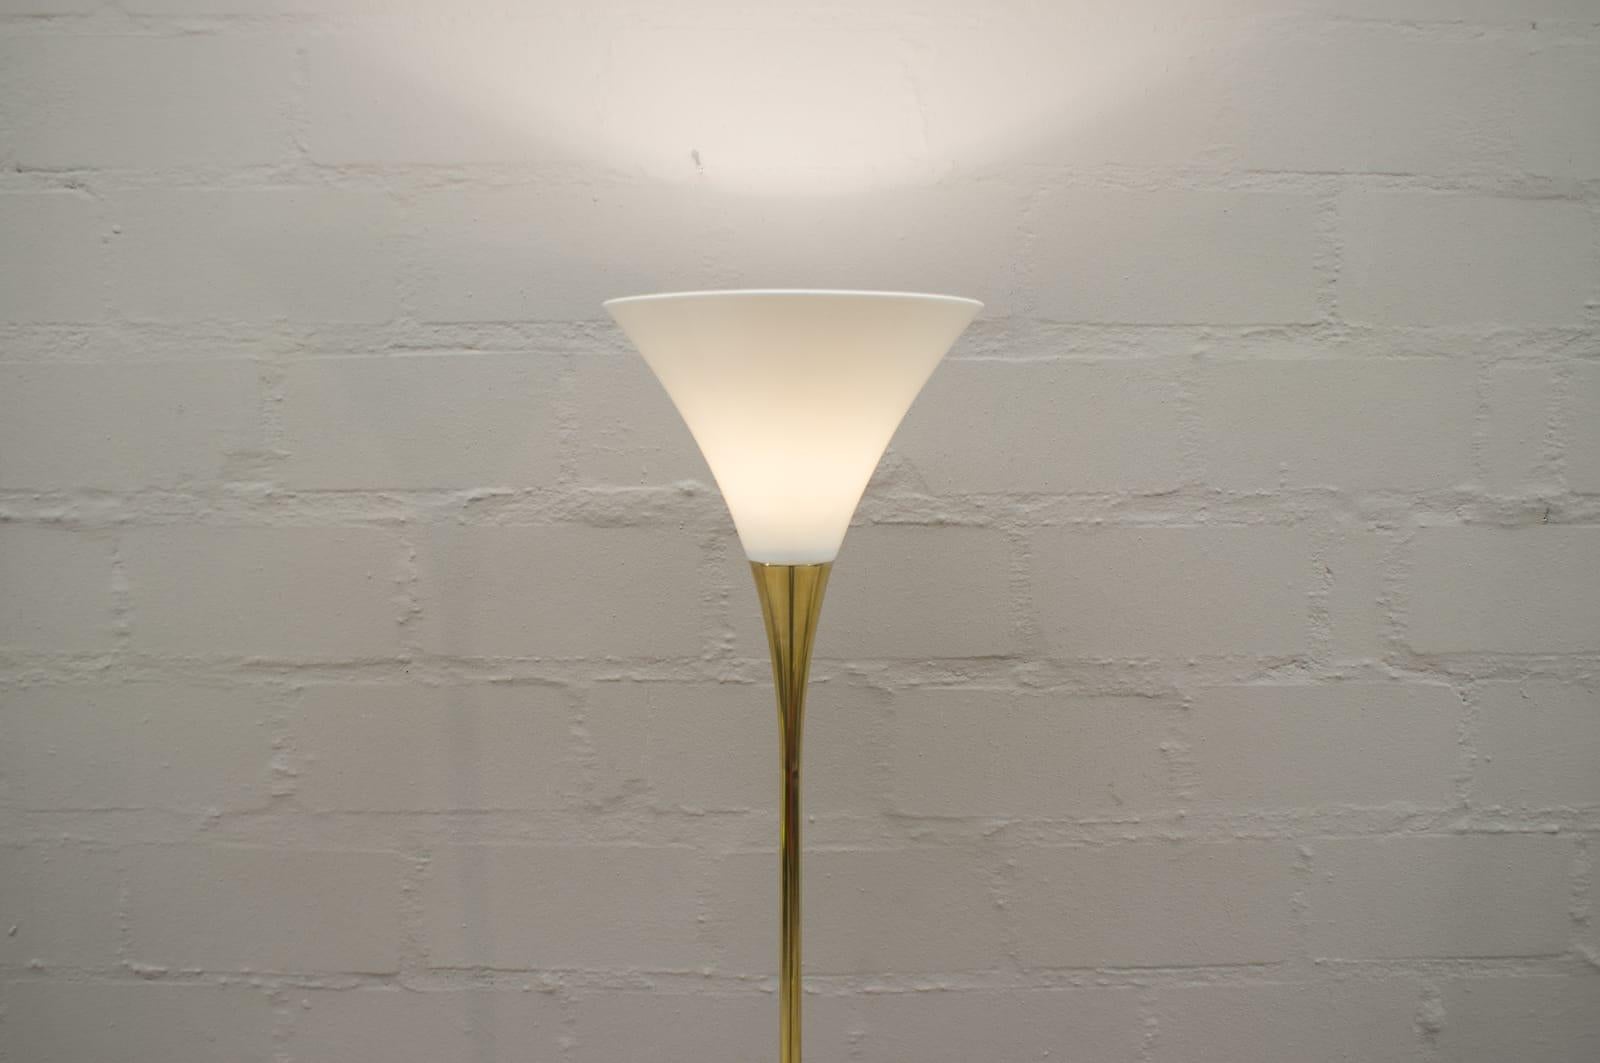 Hollywood Regency Florian Schulz Floor Lamp Lonea in Brass with an Porcelain Lamps Shade, 1990s